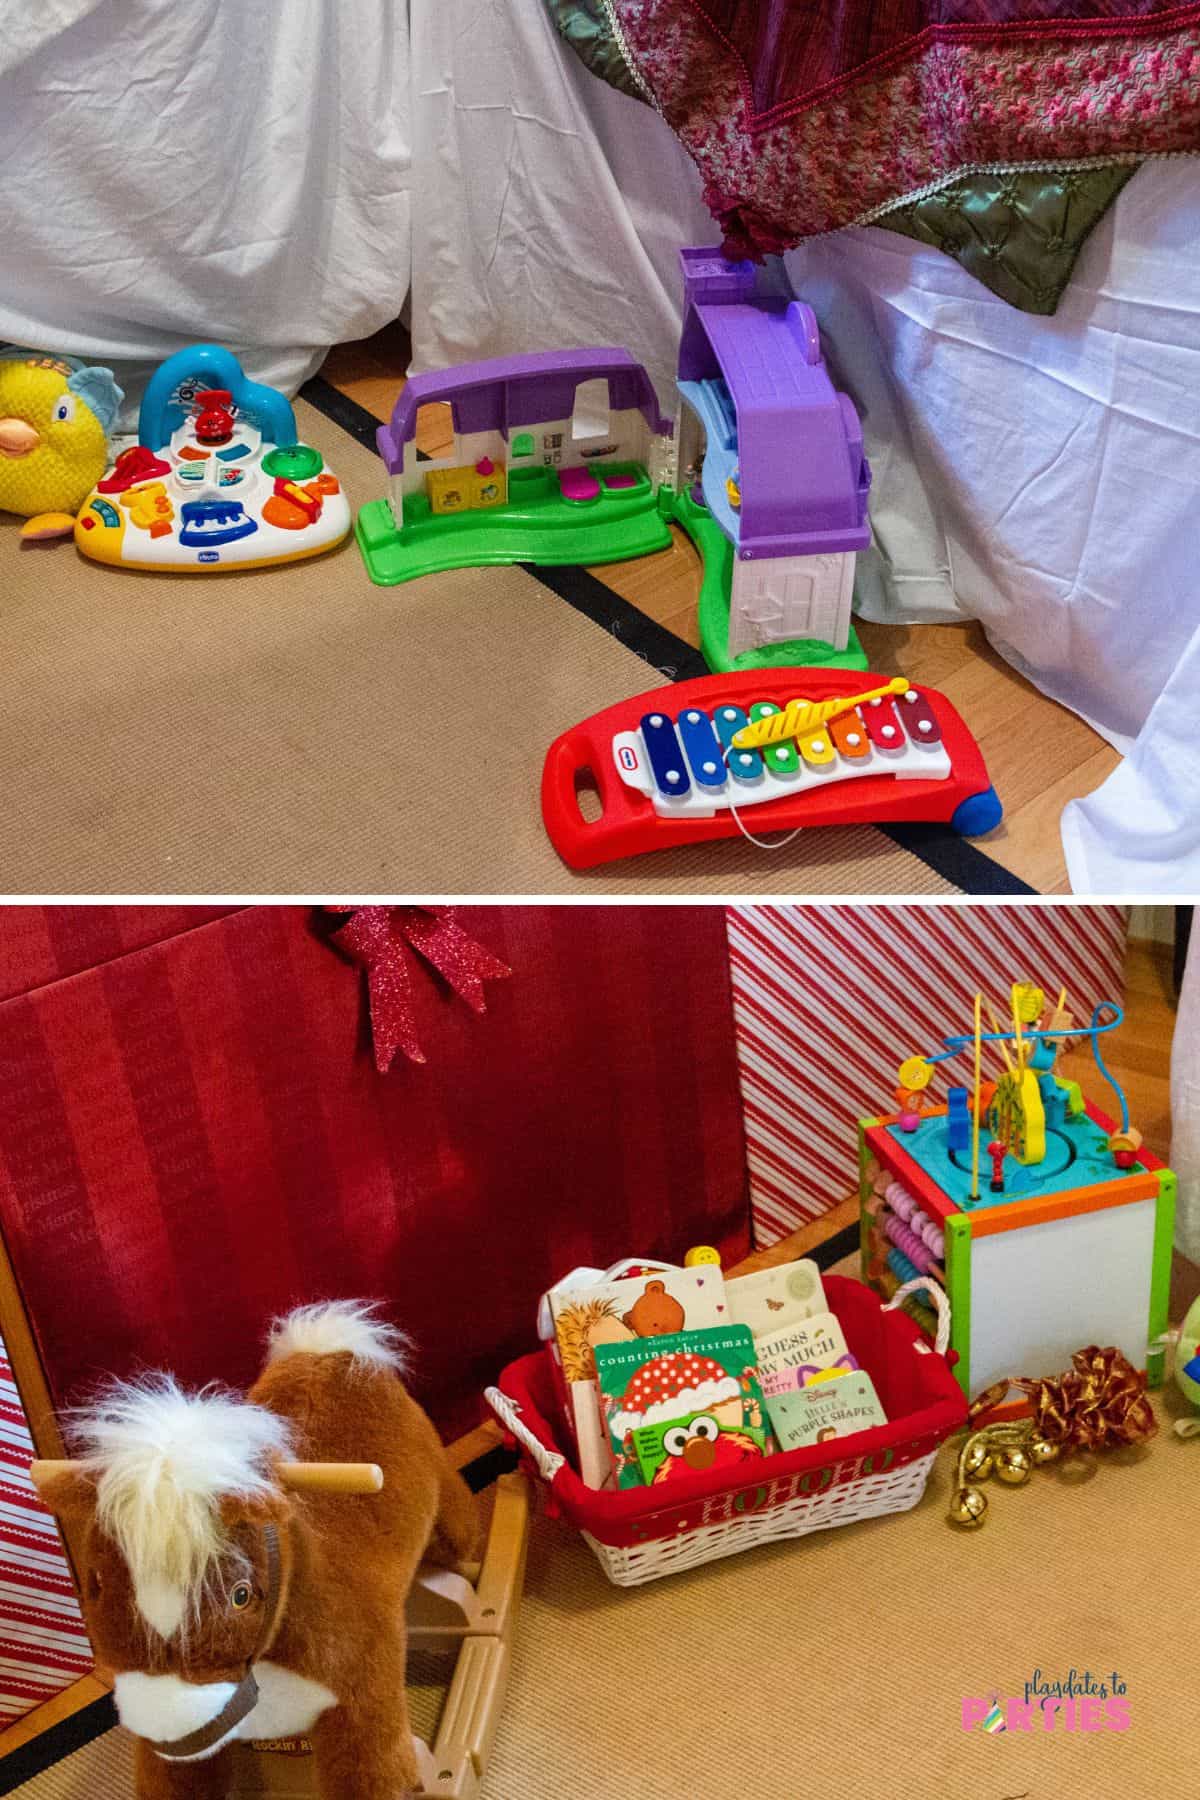 Toys set up for a Christmas party for toddlers.